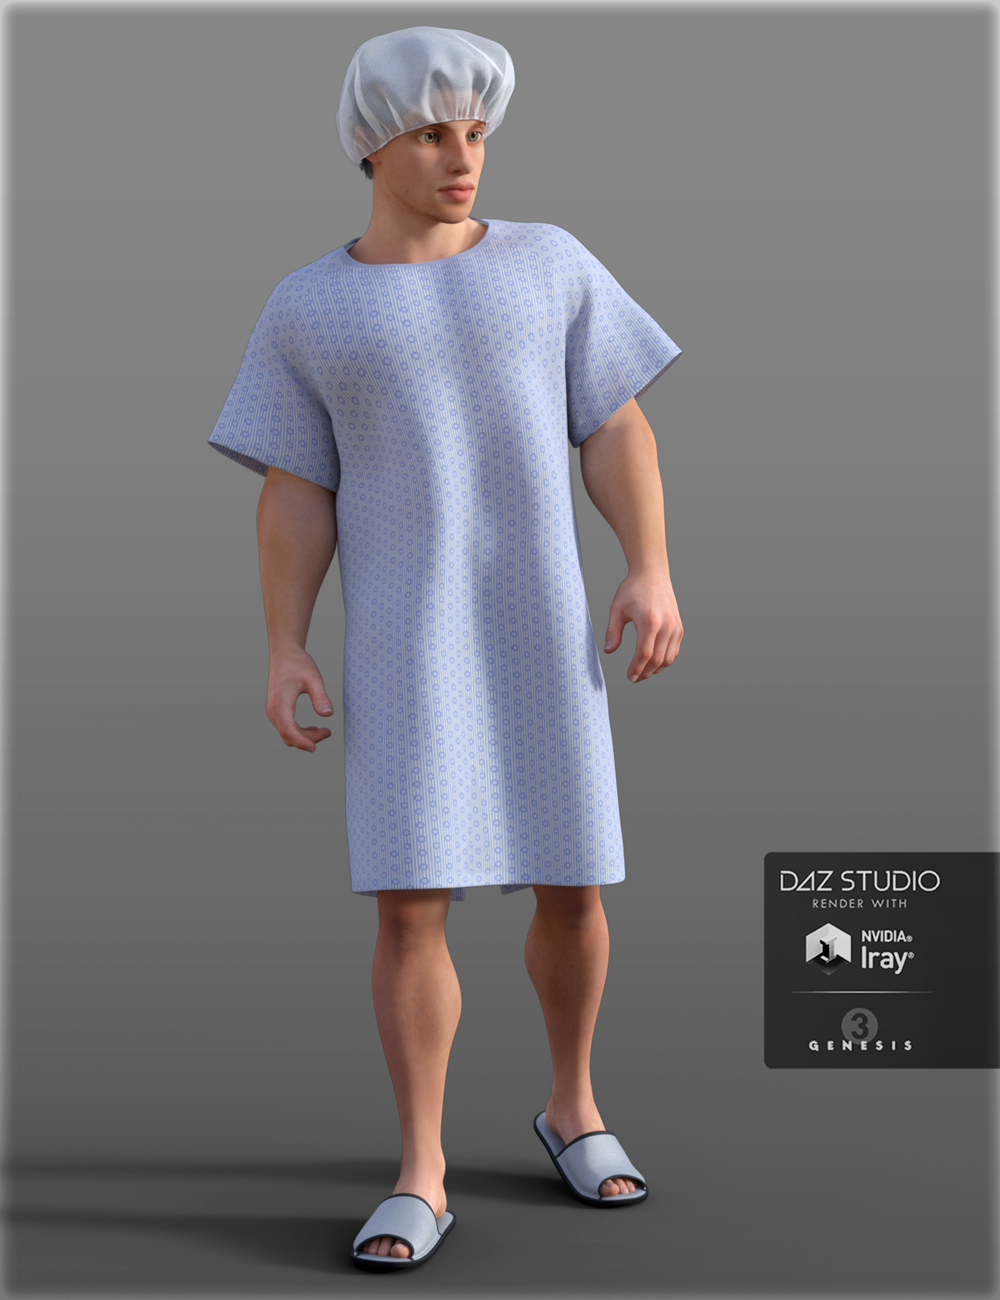 H&C Patient Gowns Set for Genesis 3 Male(s) by: IH Kang, 3D Models by Daz 3D